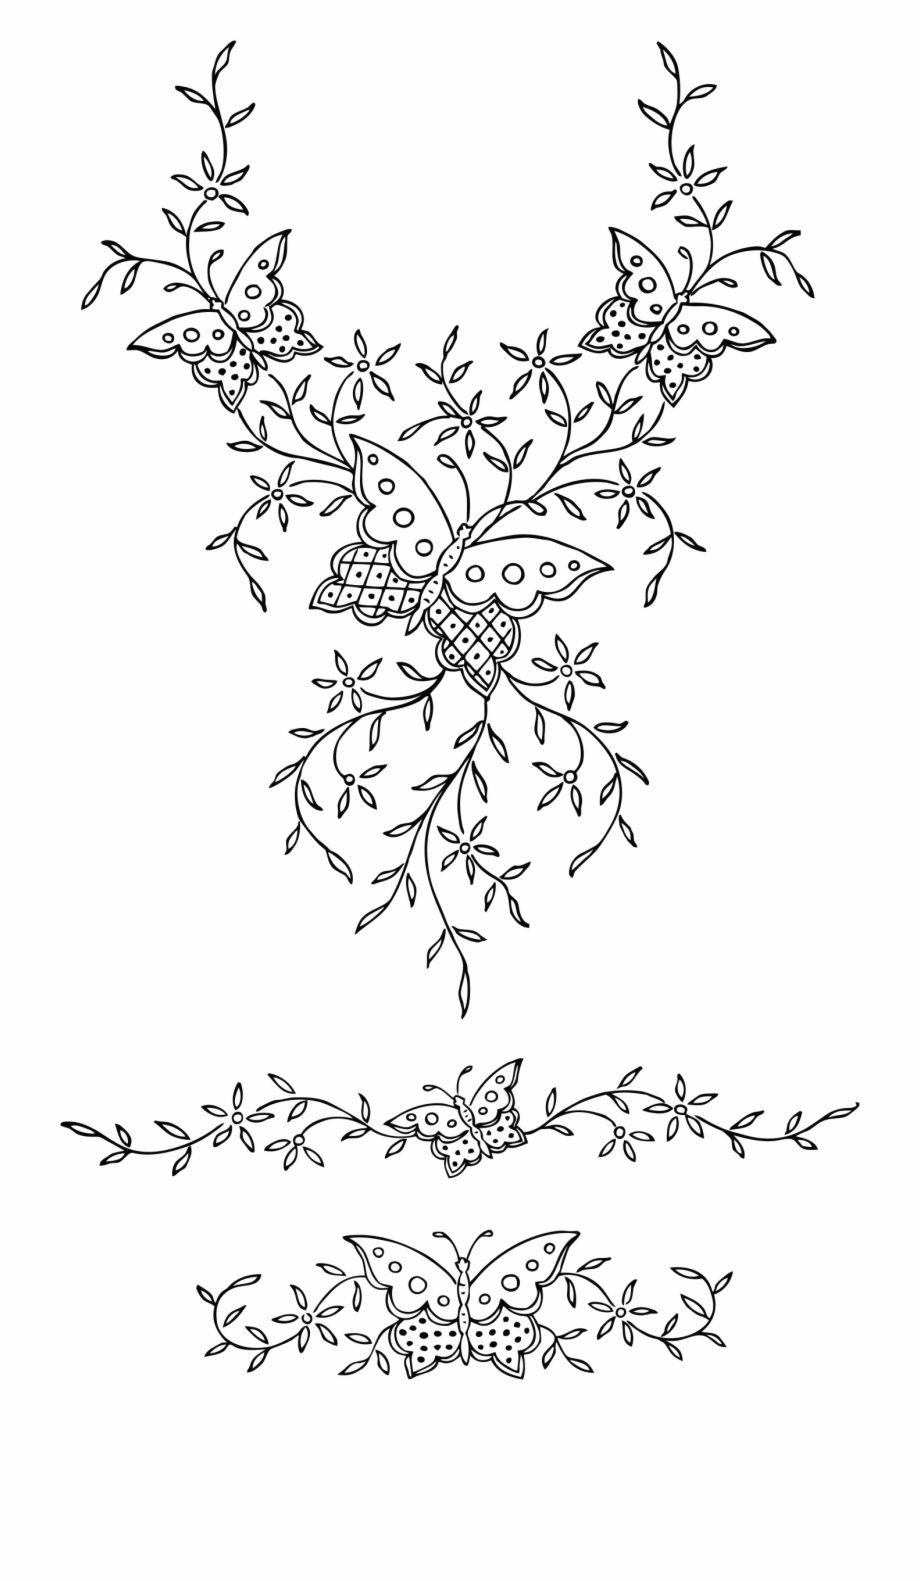 Flower Embroidery Patterns This Free Icons Png Design Of Ornamental Butterflies Victorian